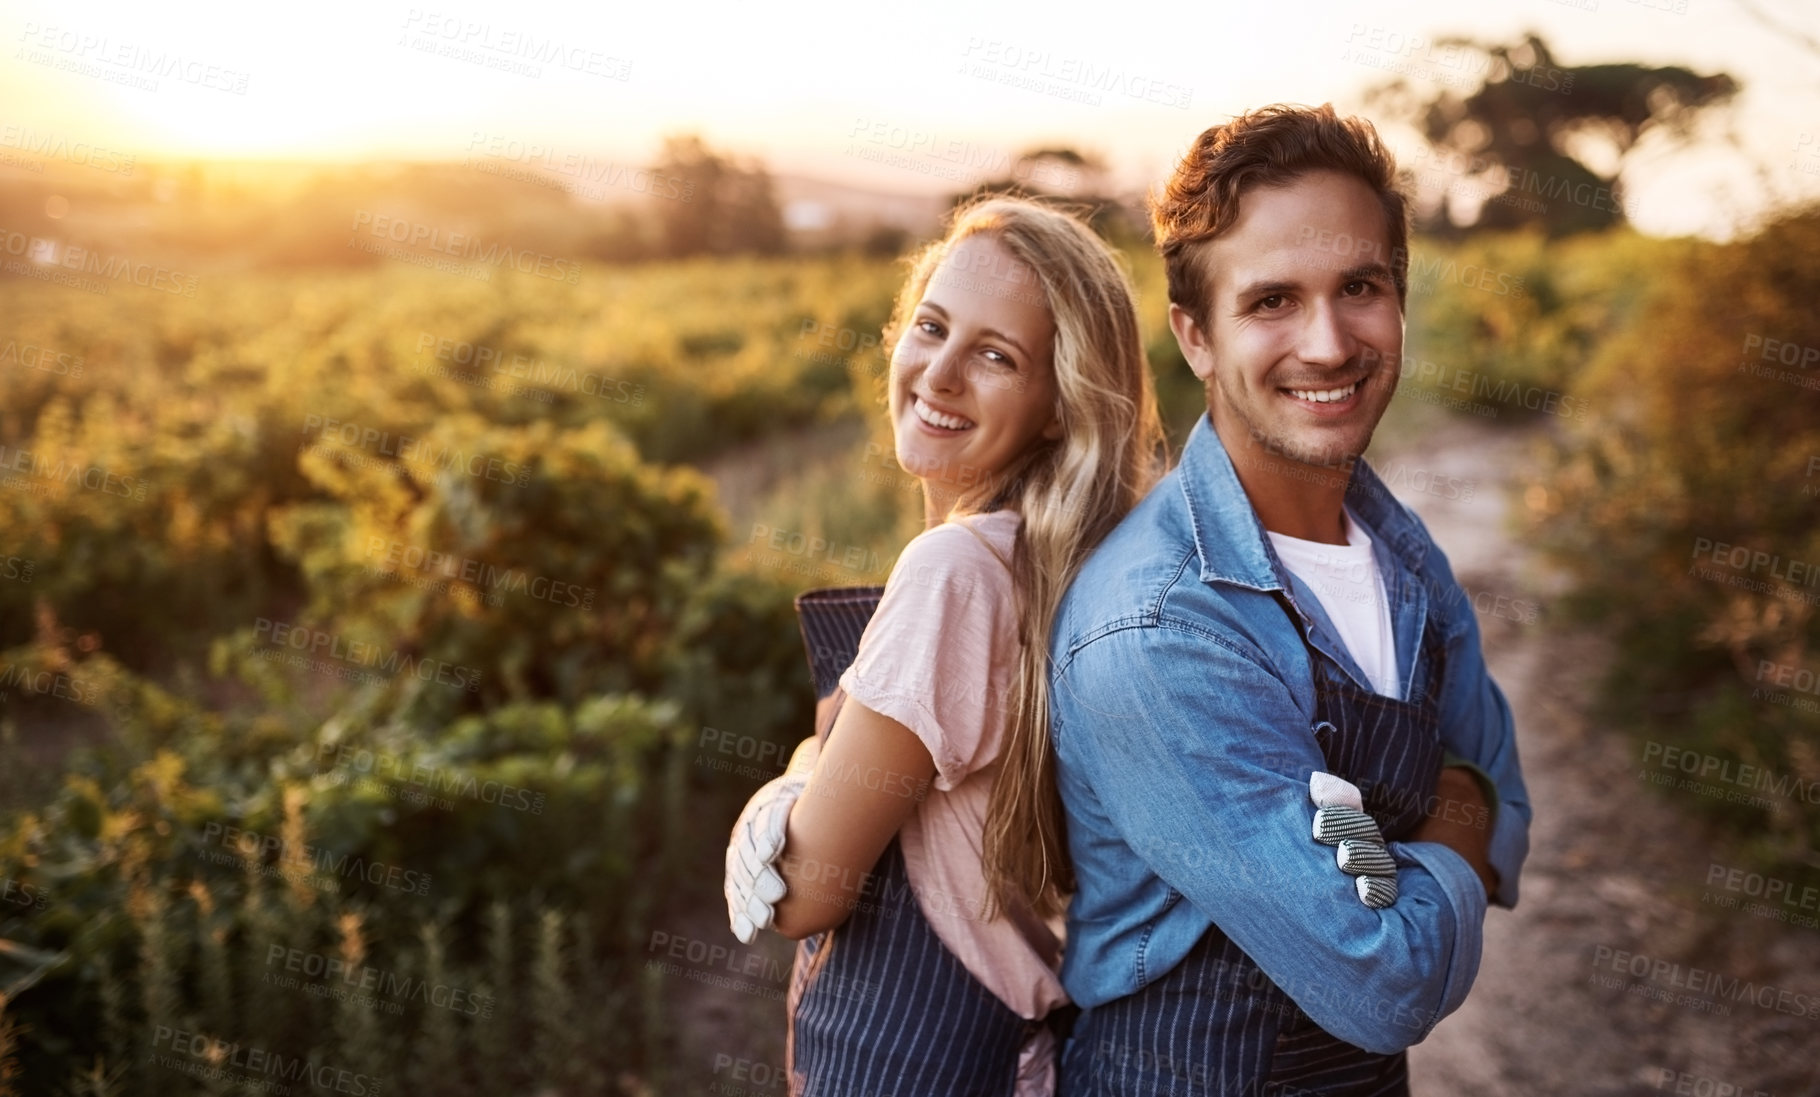 Buy stock photo Portrait of a confident young man and woman working together on a farm